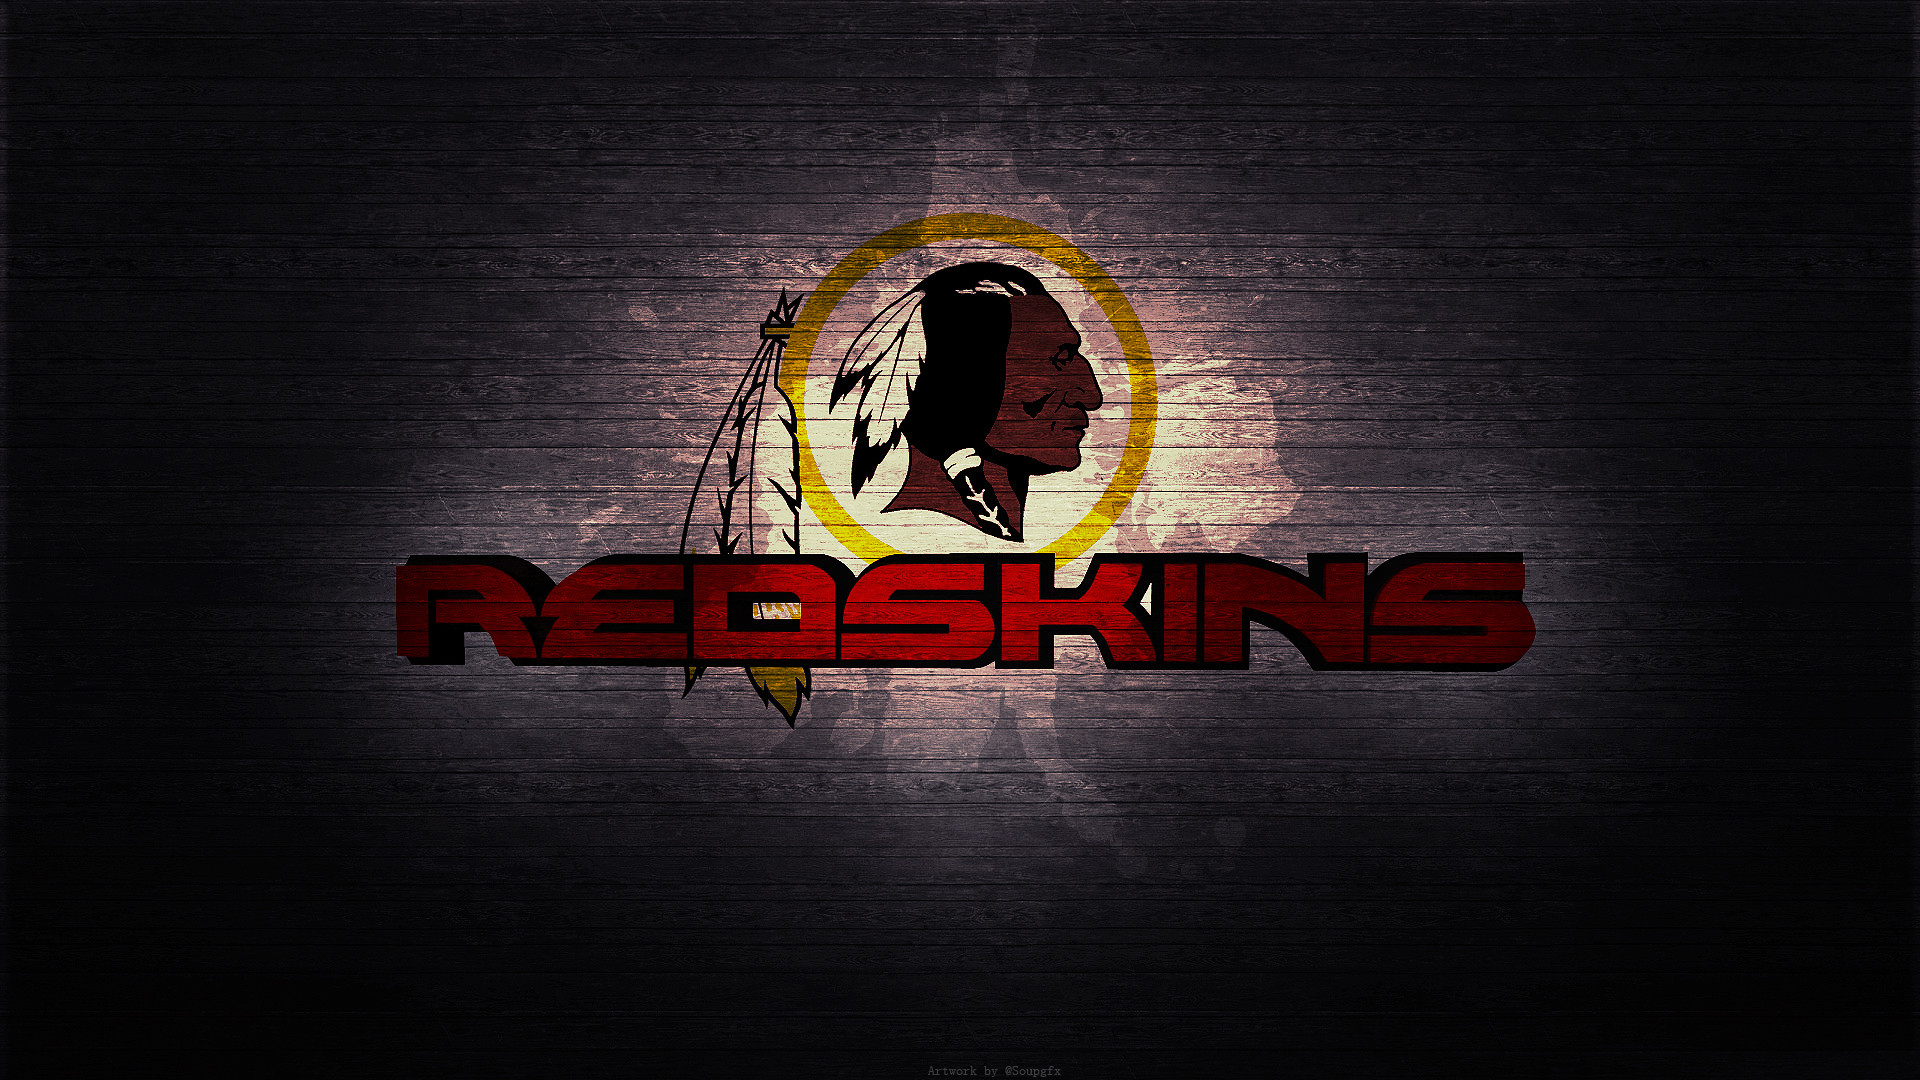 1920x1080 Related Wallpapers from Dallas Cowboy Wallpaper. Redskins Wallpaper